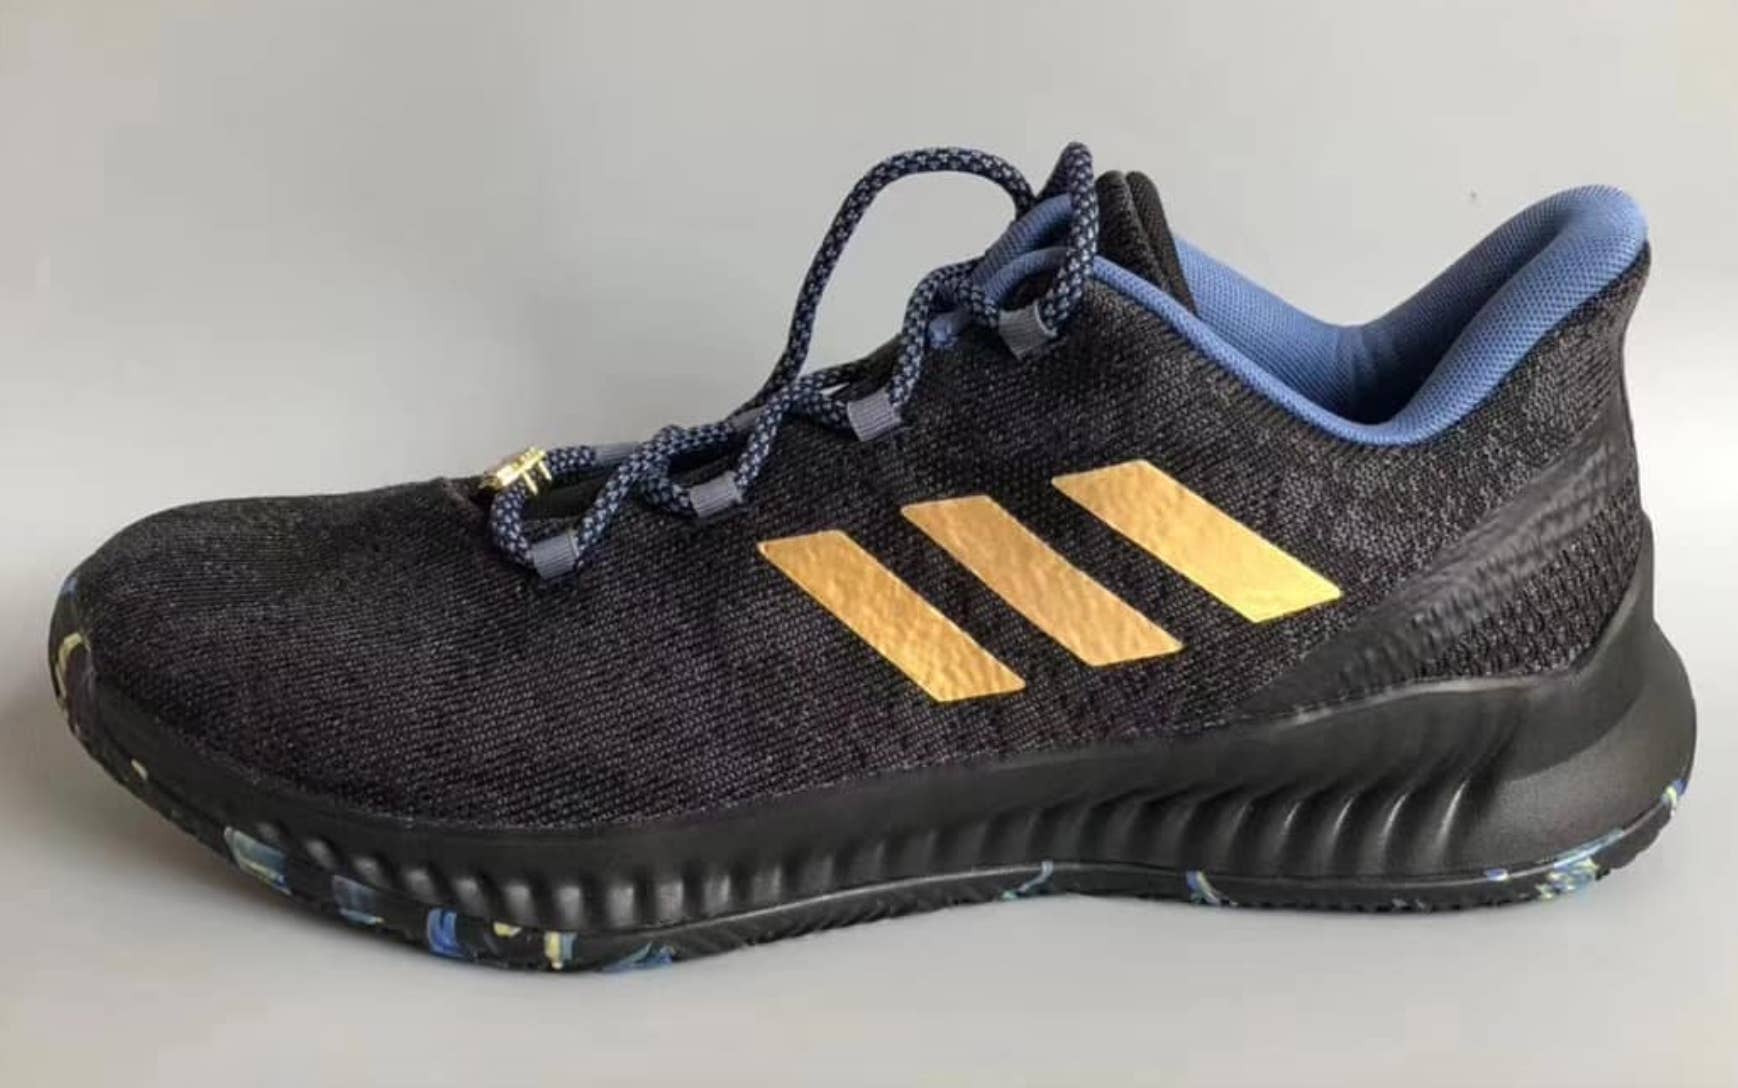 James Harden's Nightmare adidas Shoes Can Be Purchased By Phone 